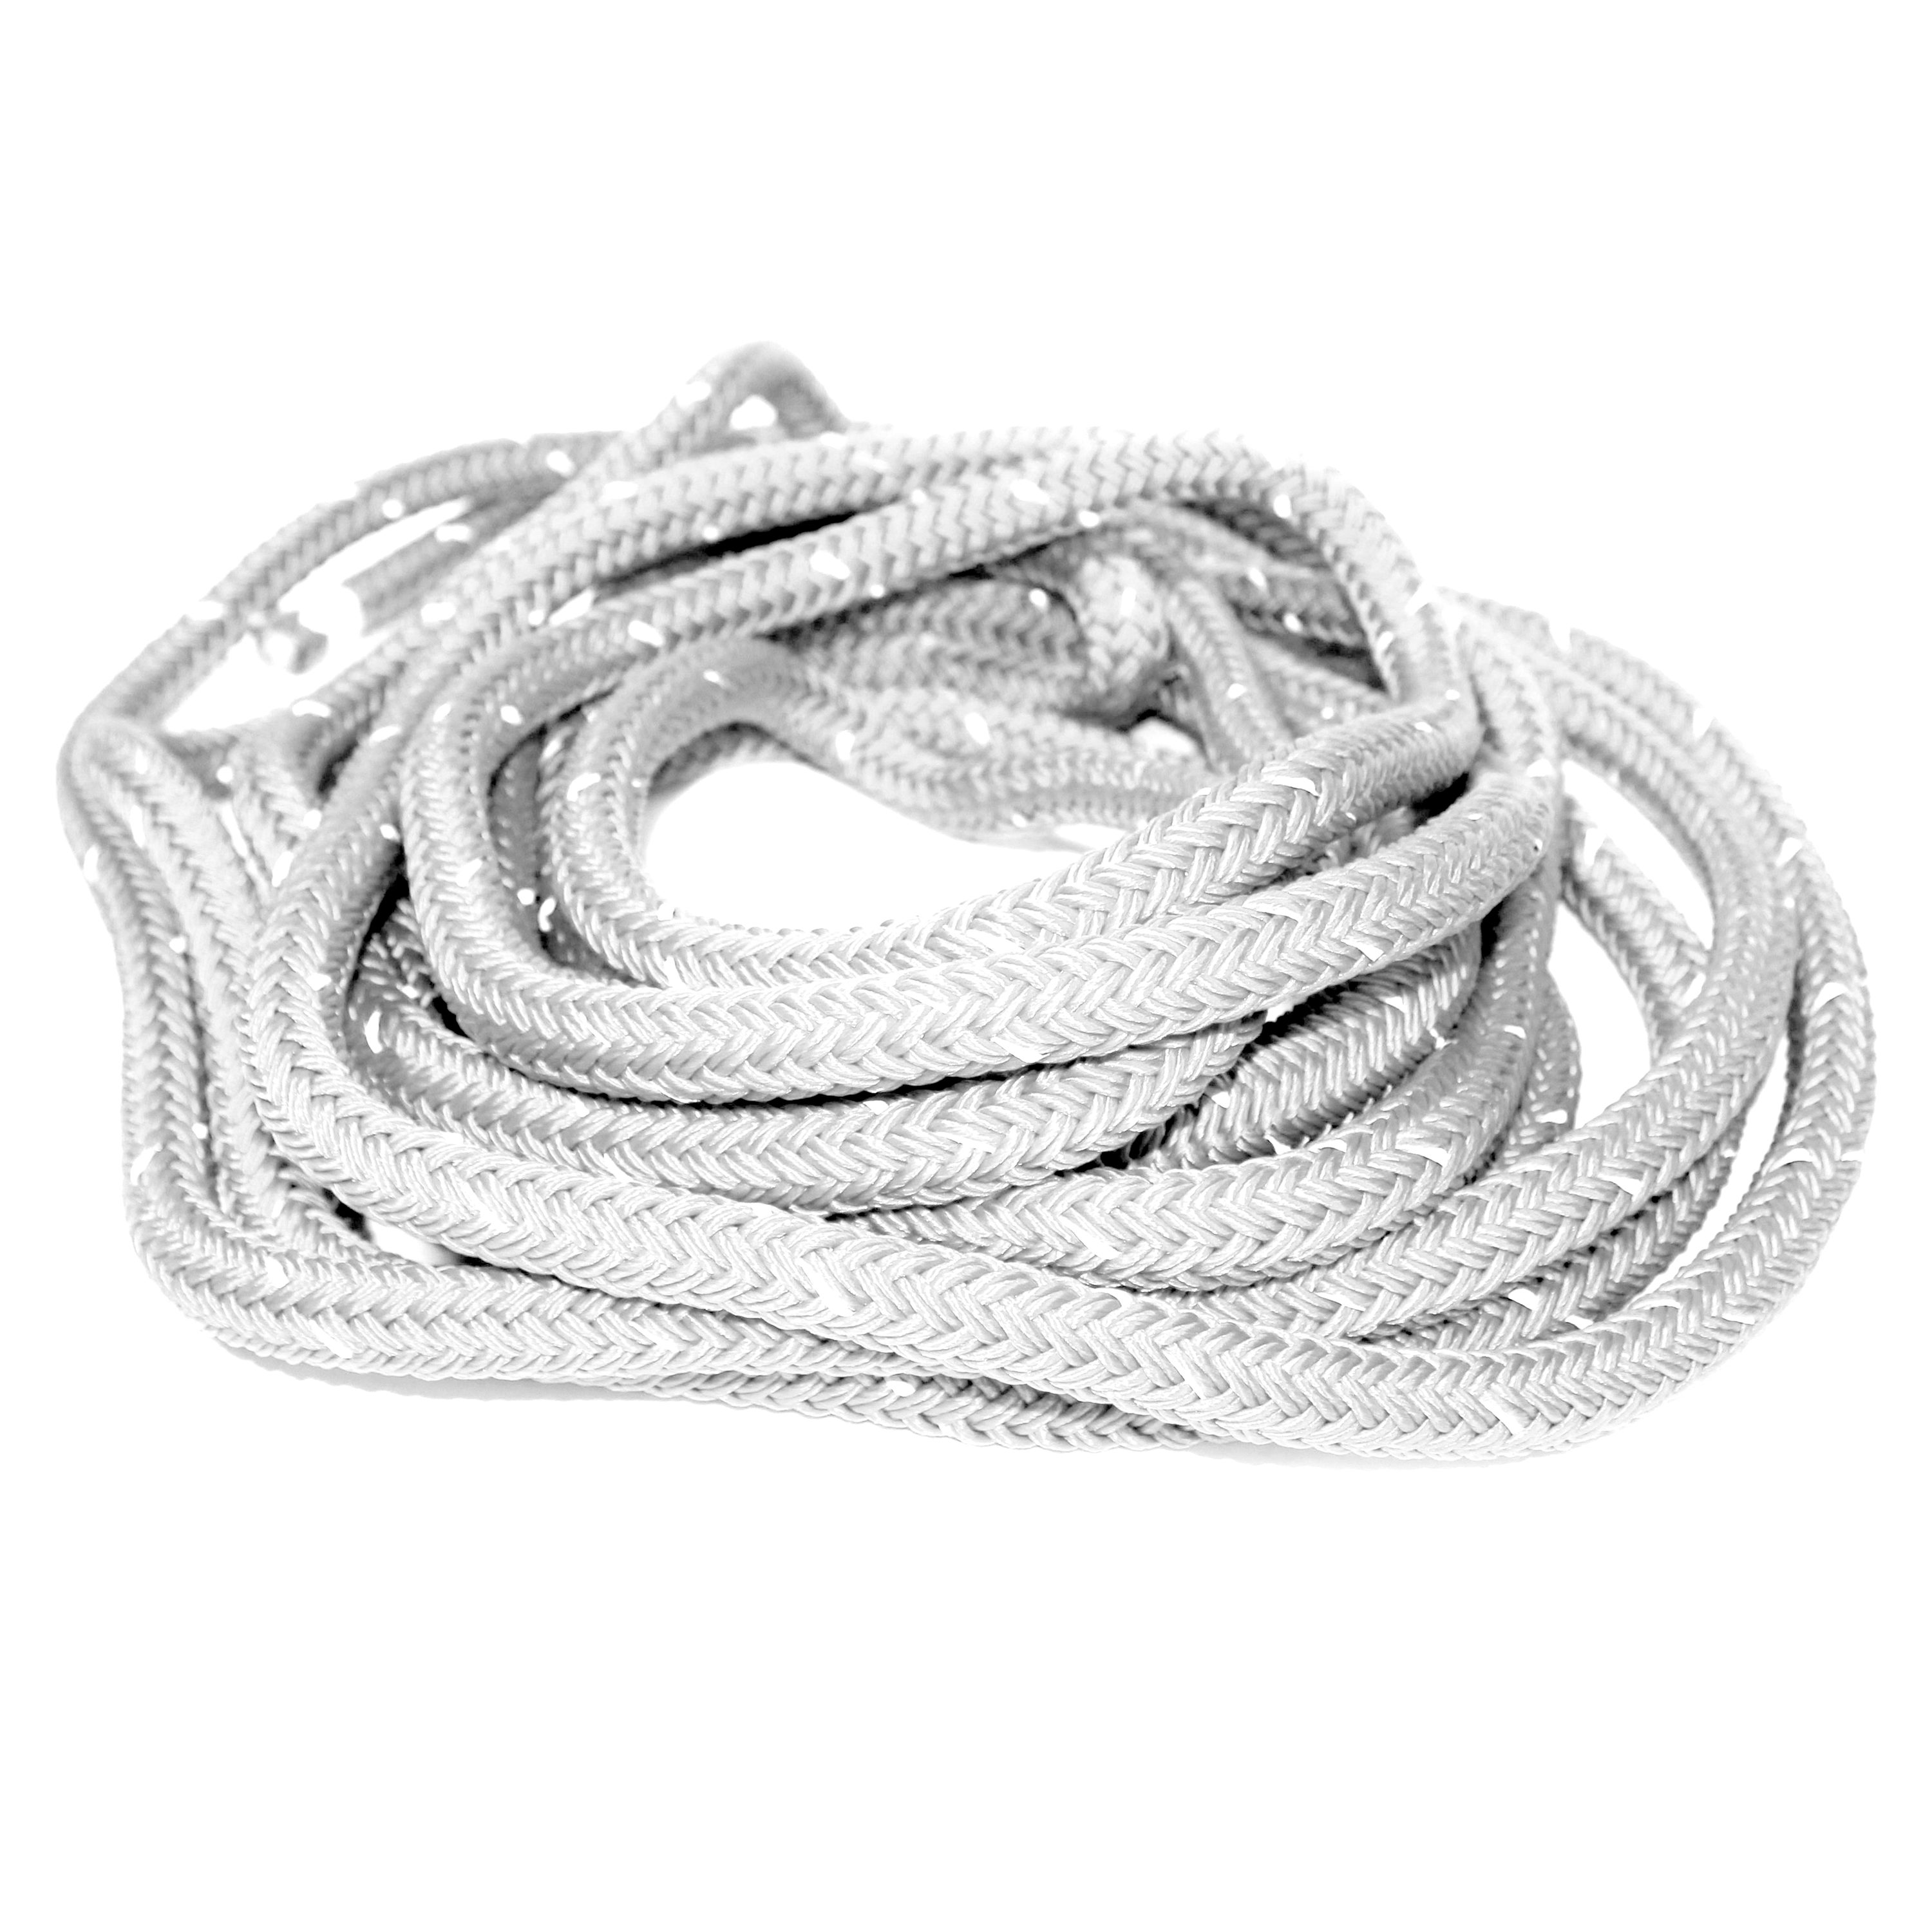 25 Foot Long Packaged Rope at